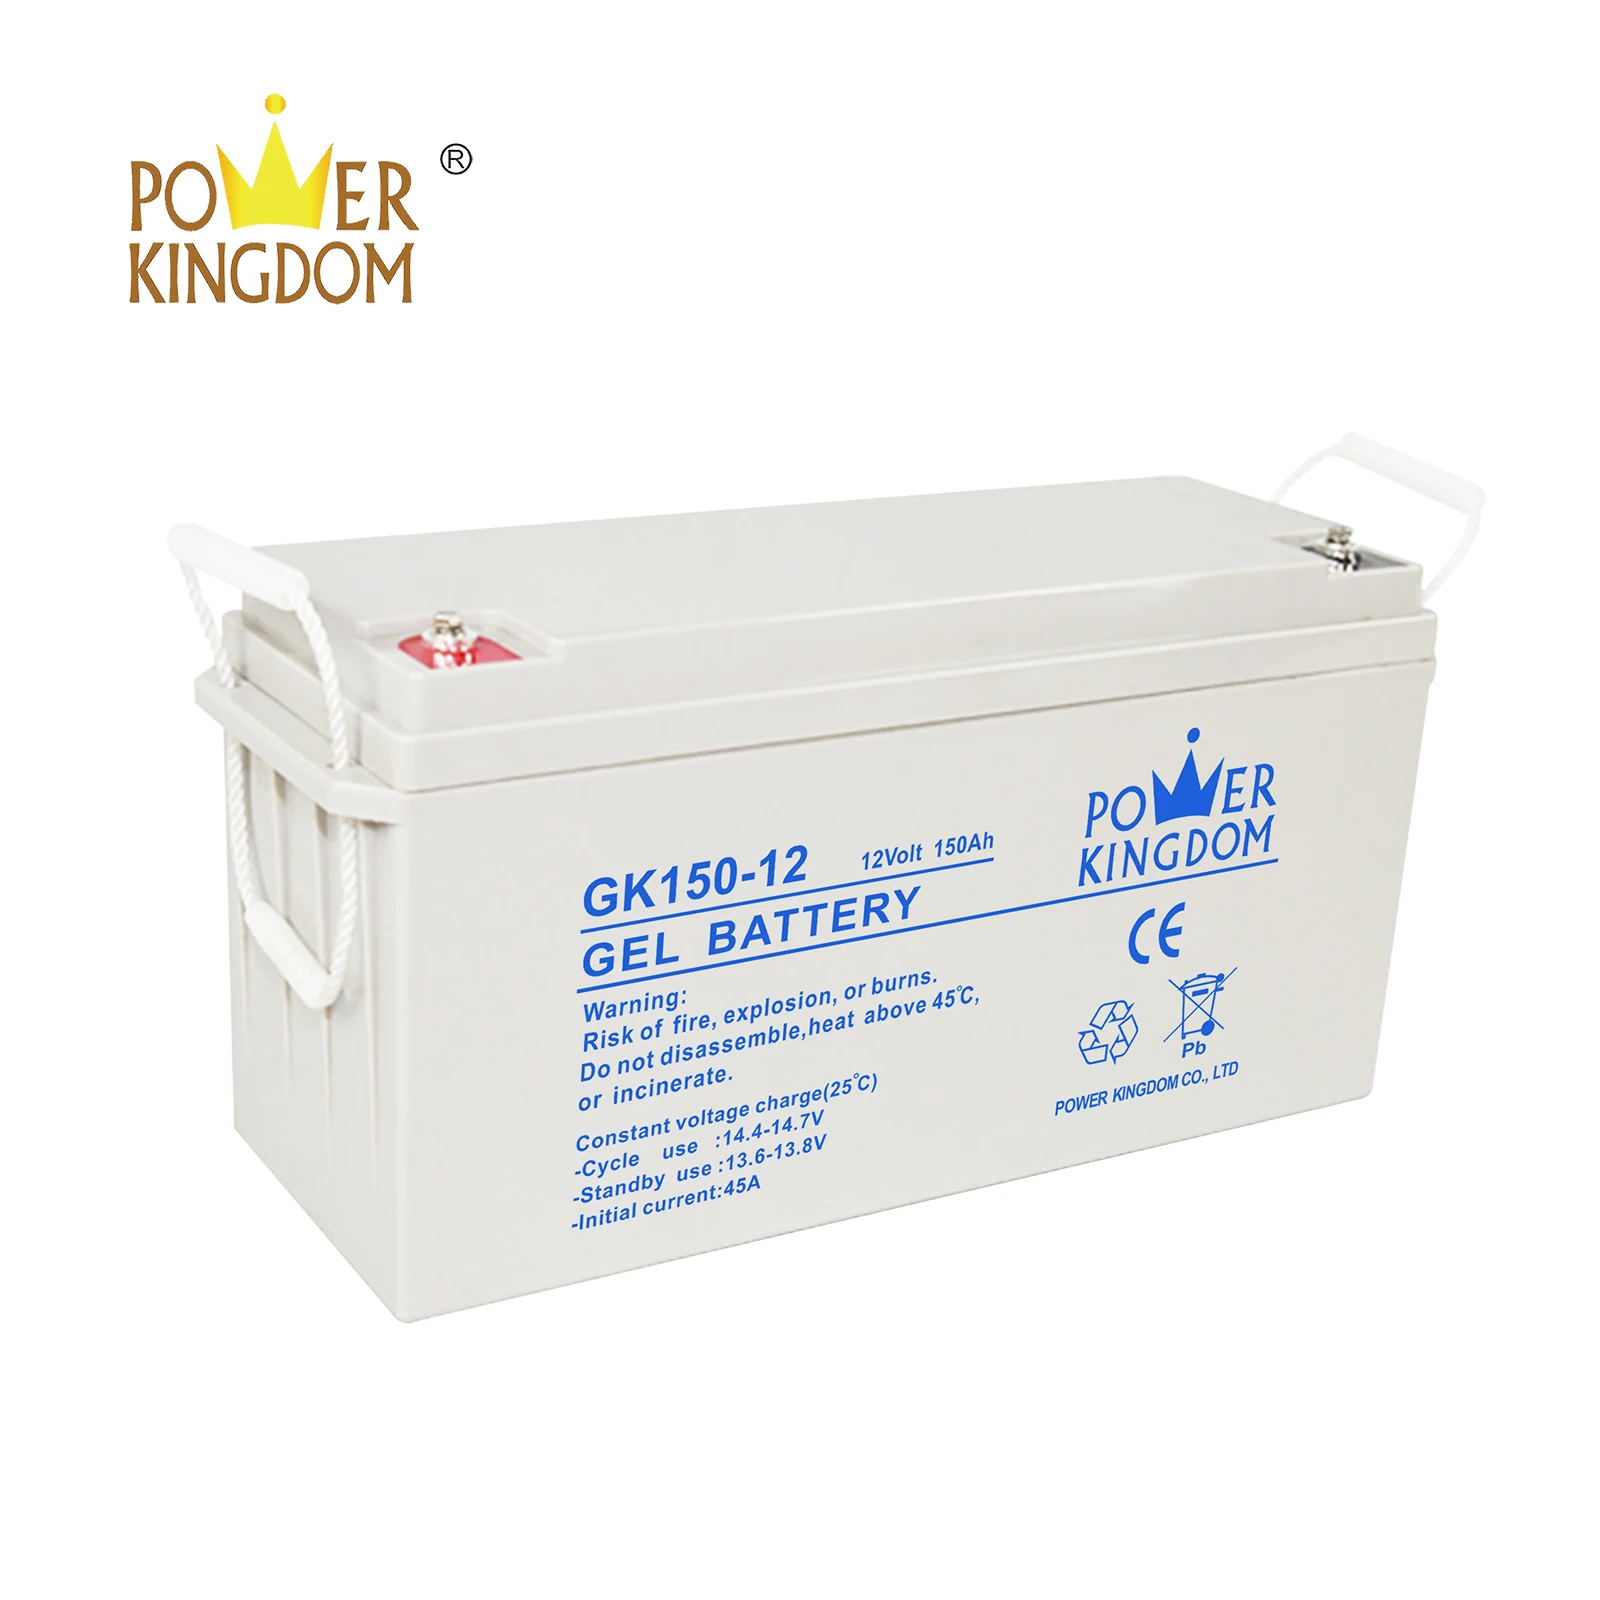 Power Kingdom rechargeable 12v 7ah sealed battery factory solor system